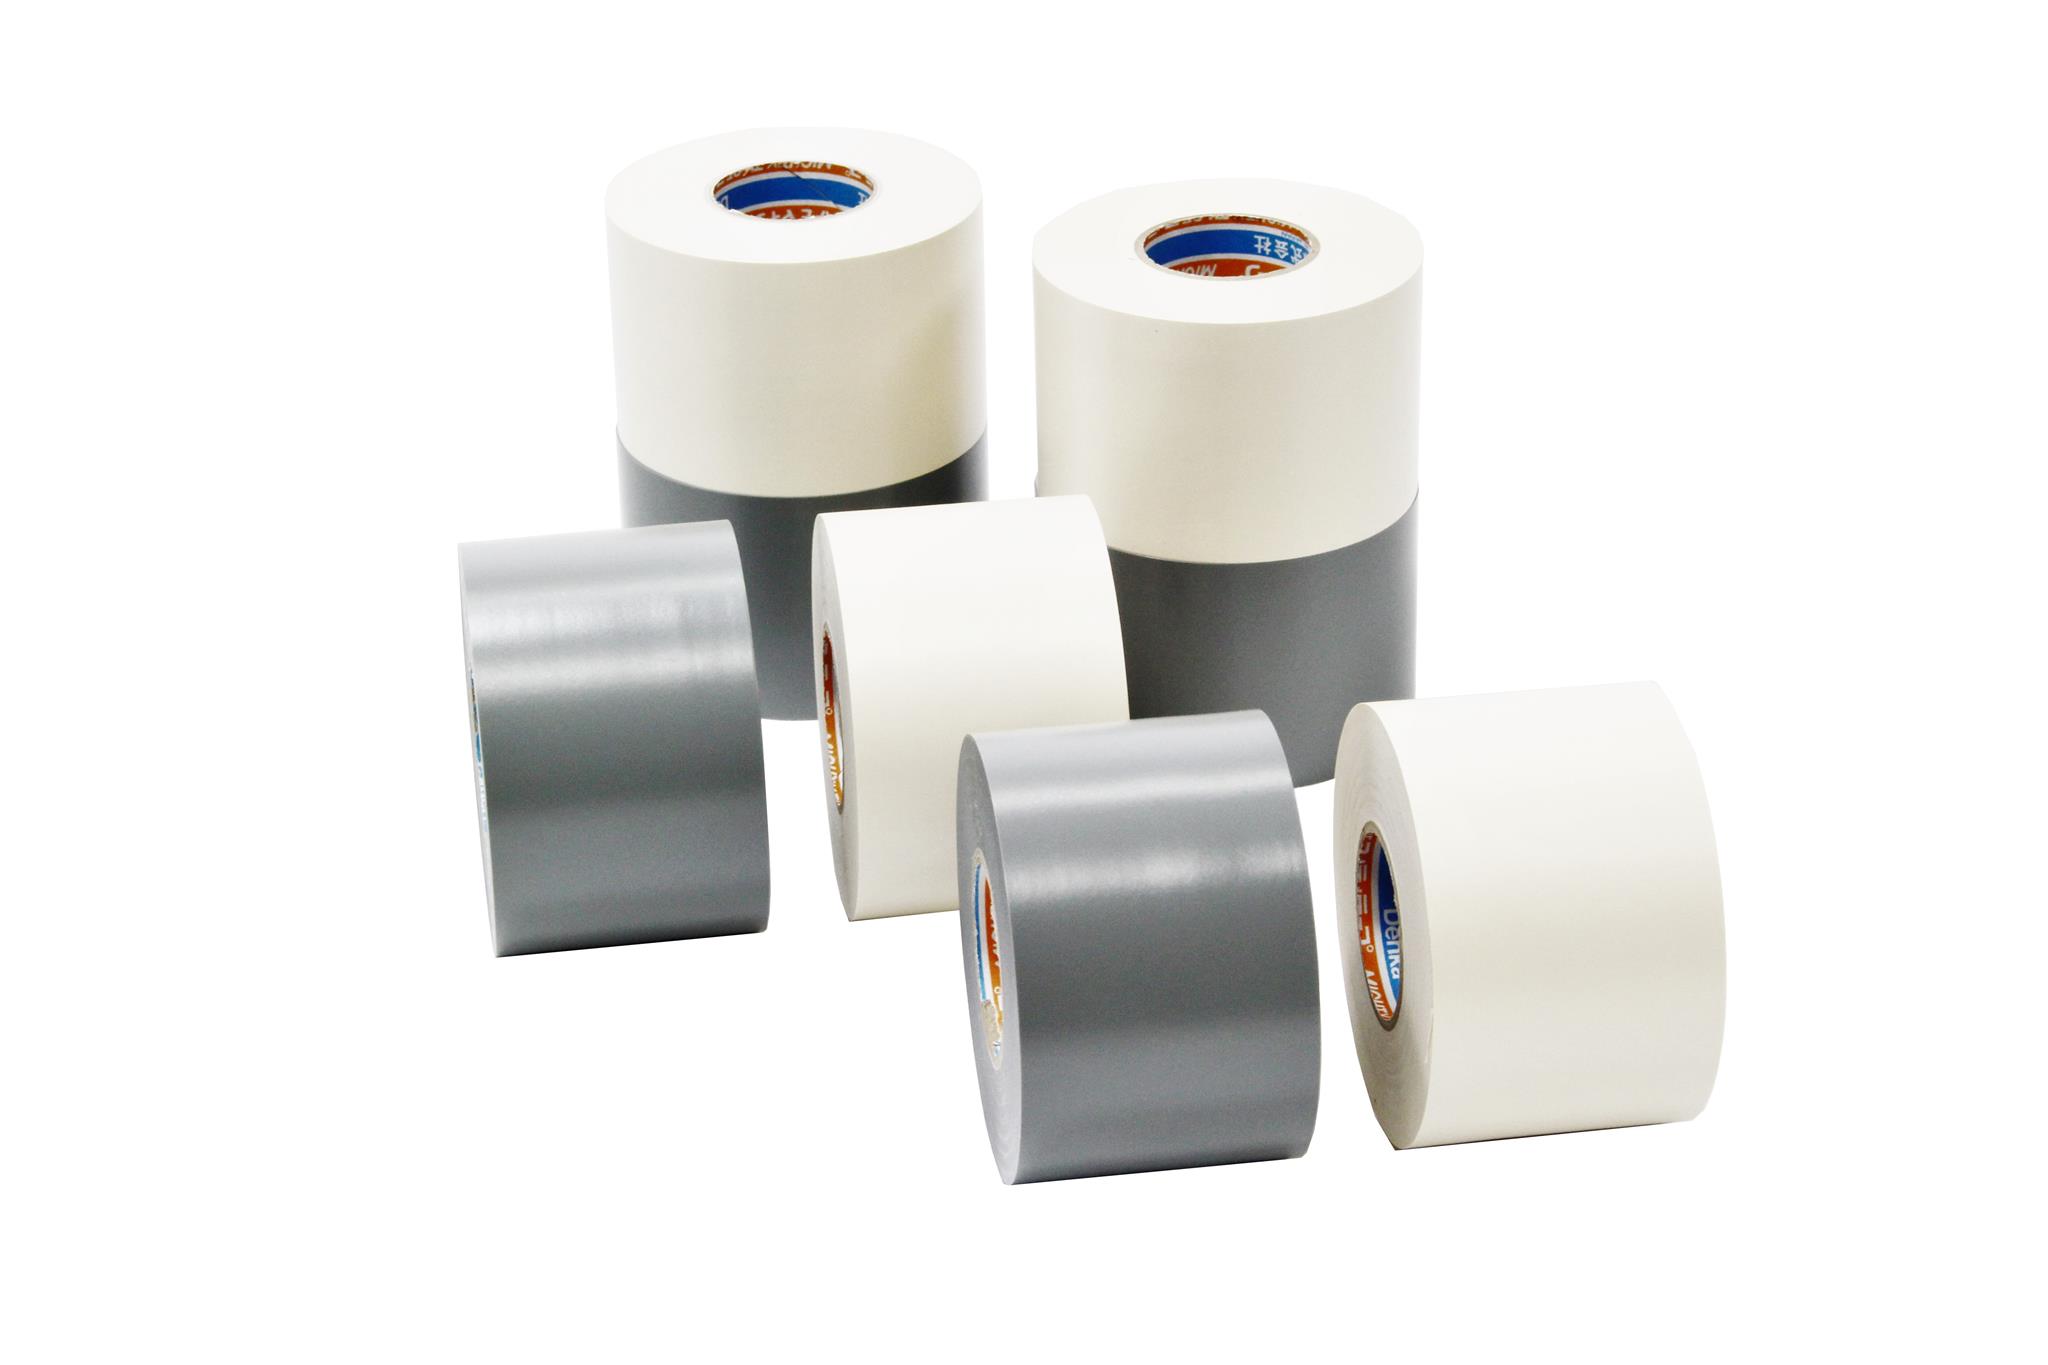 Vinyl tape for air conditioning ducts (adhesive type)